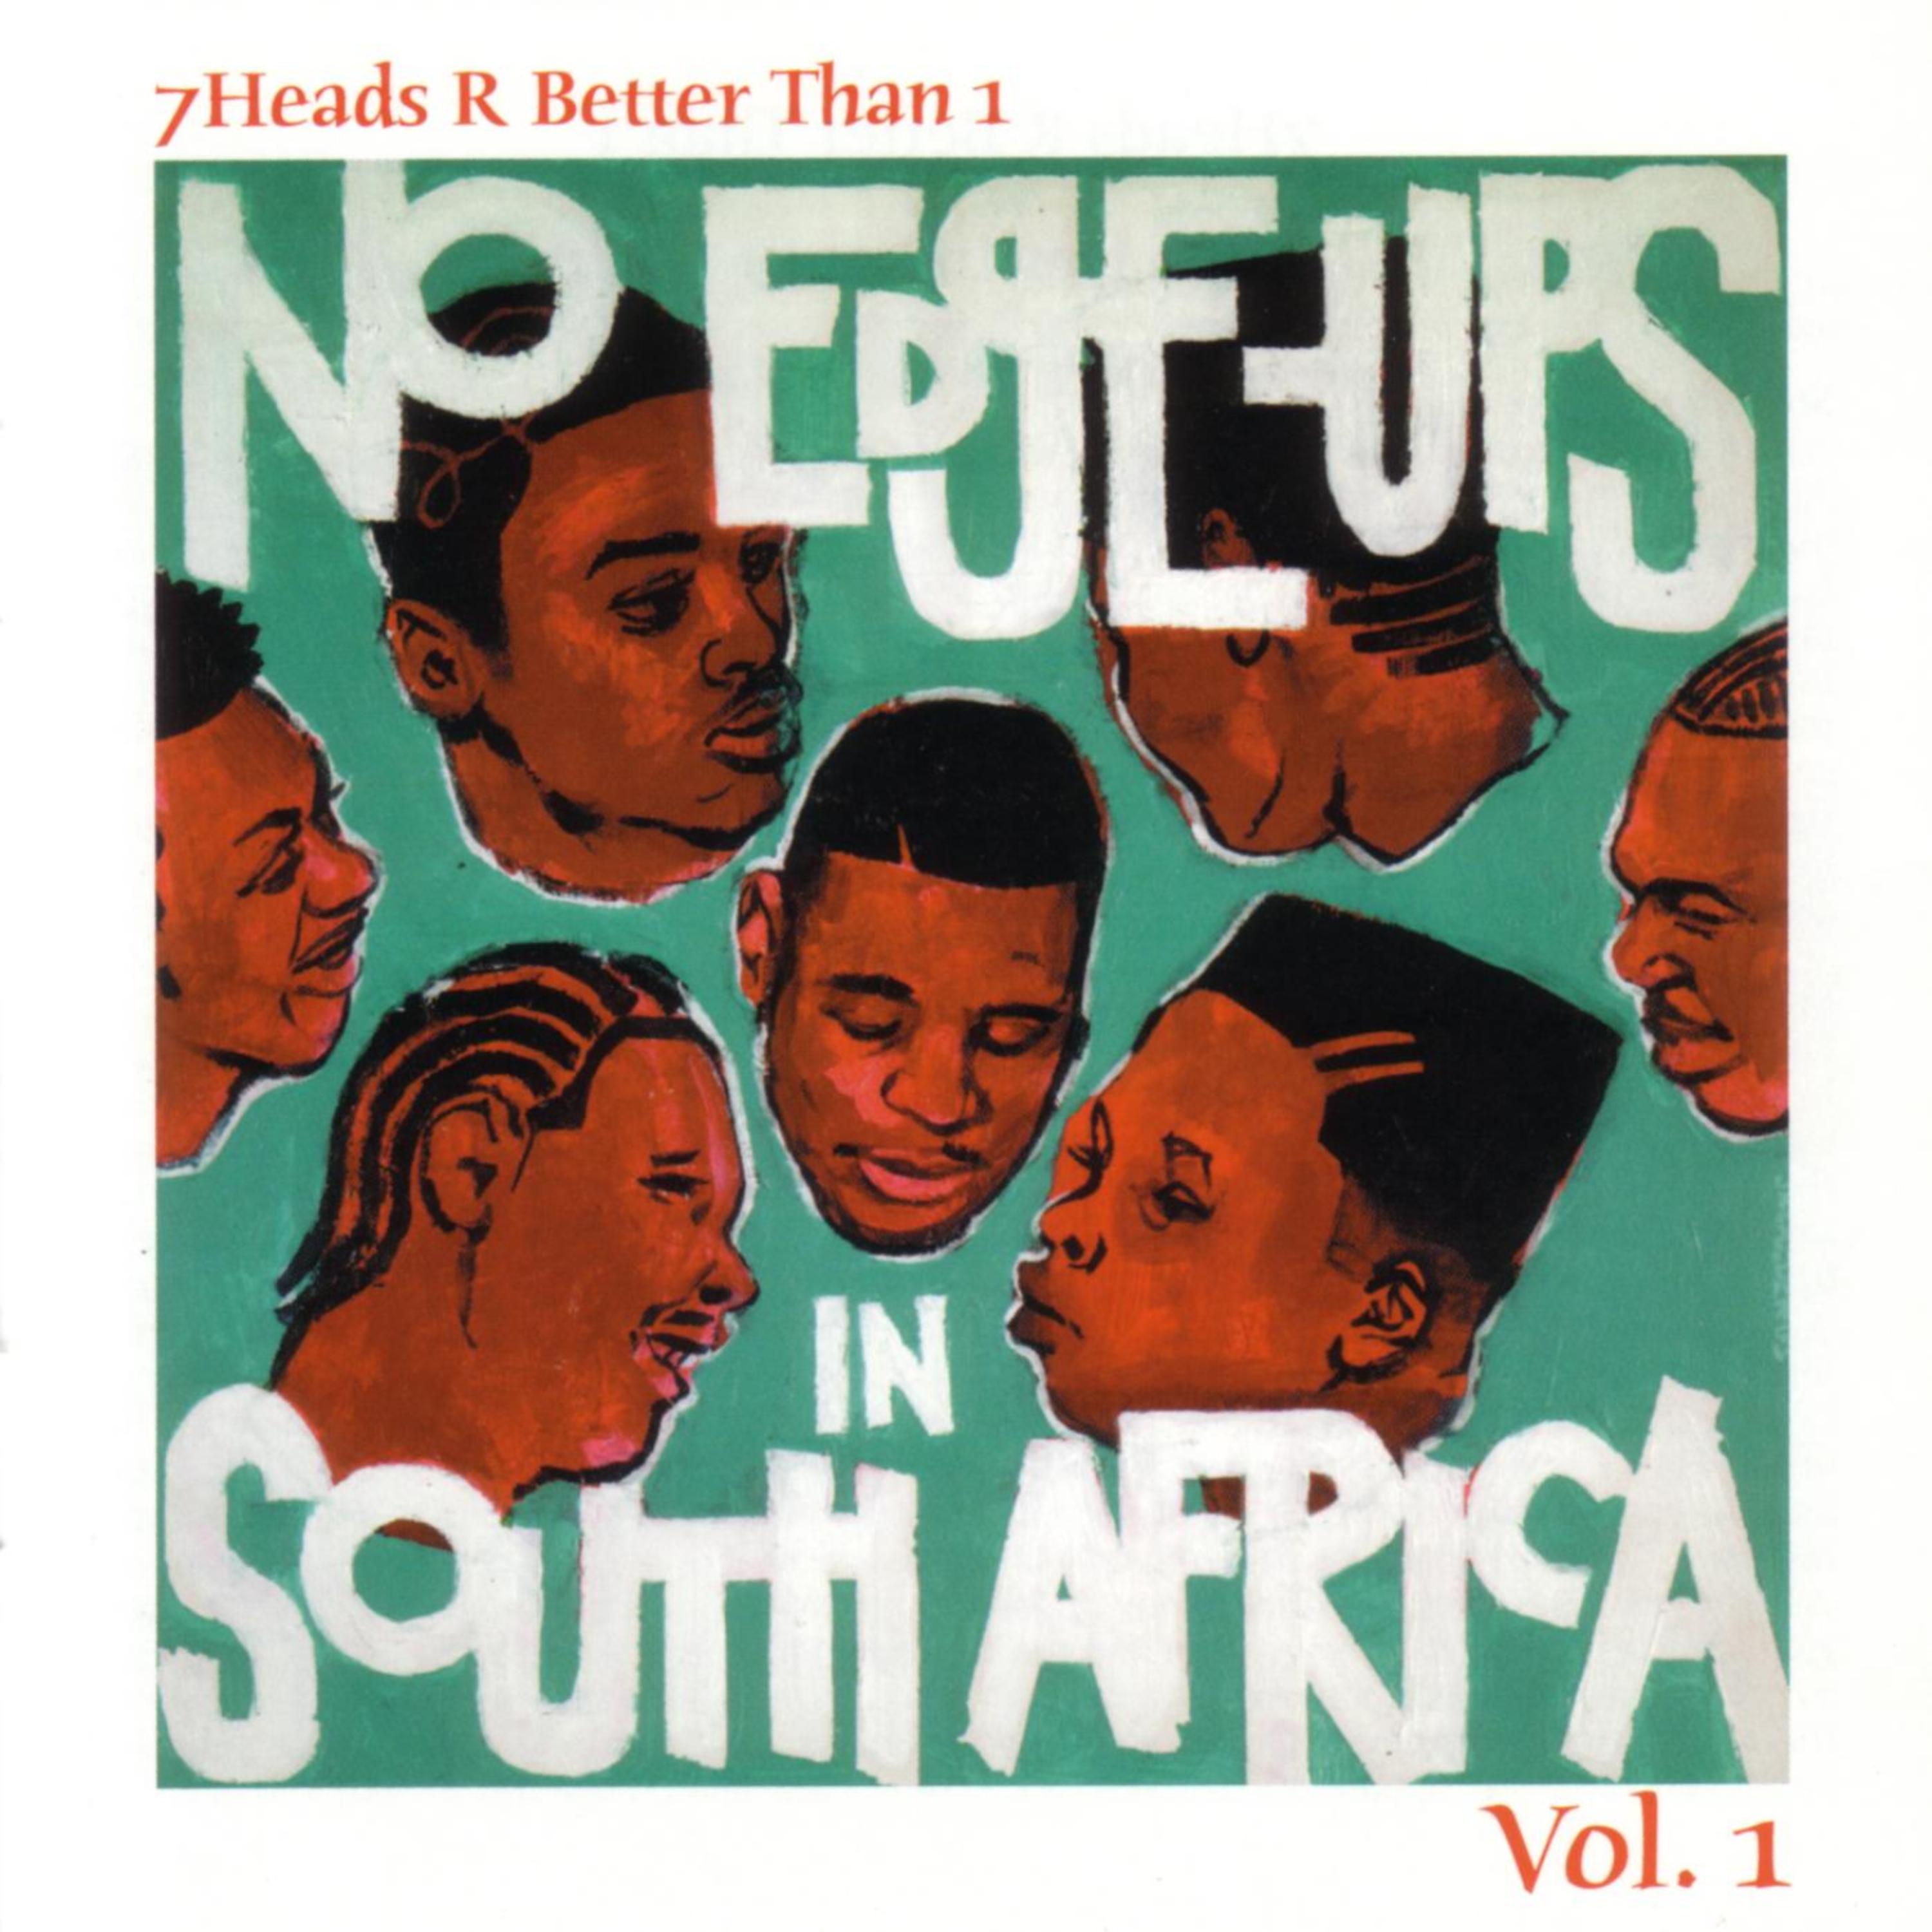 Постер альбома 7Heads R Better Than 1 Vol. 1: No Edge-Ups In South Africa